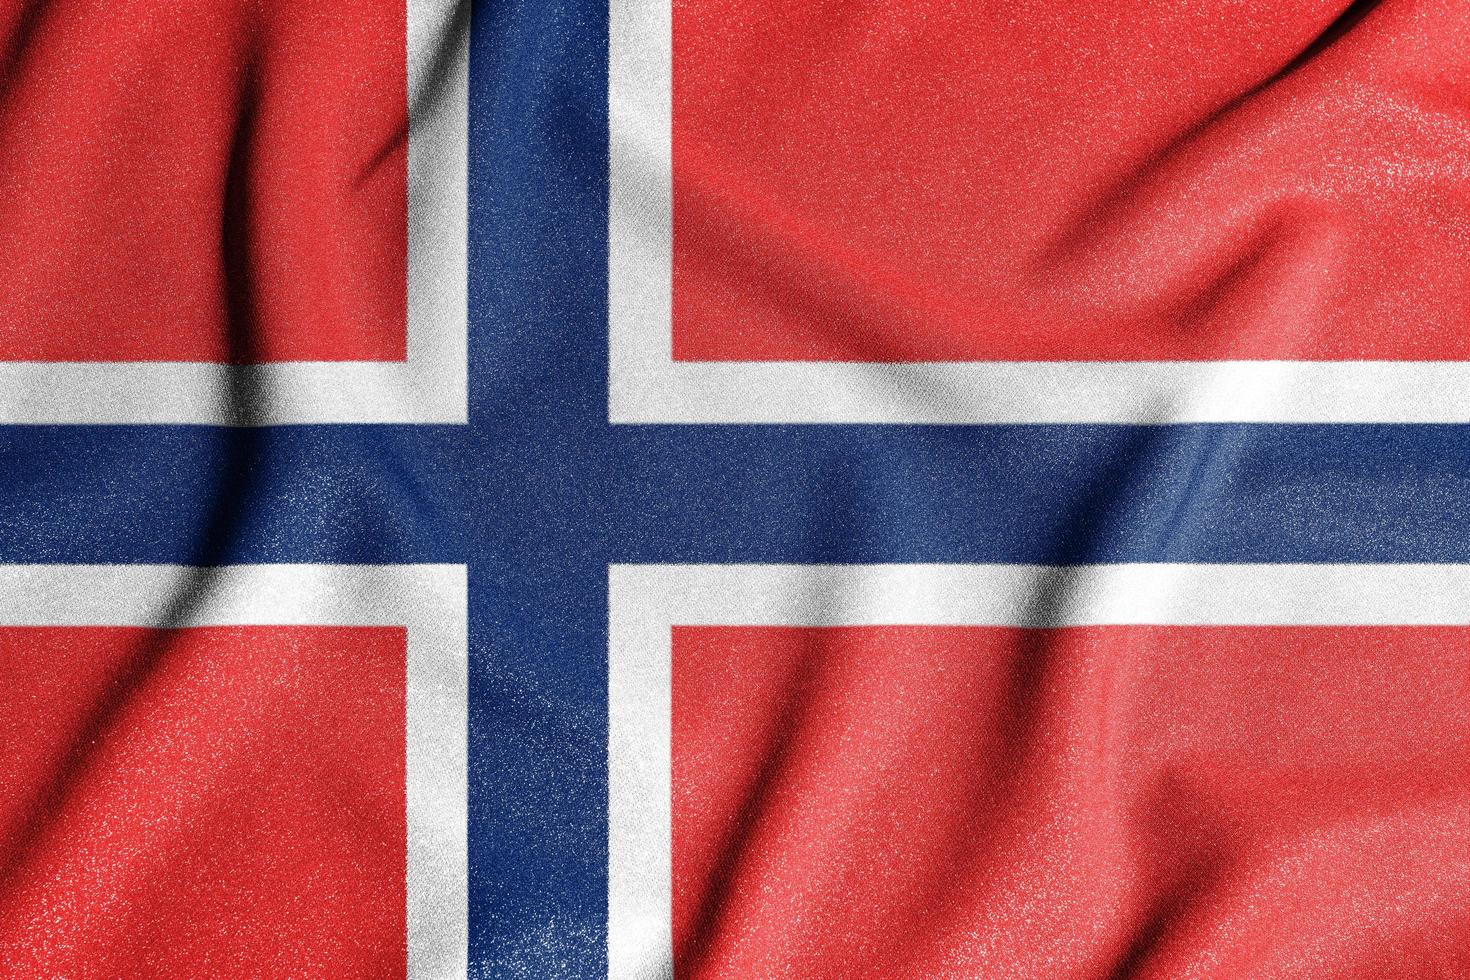 National flag of the norway, spitsbergen, bouvet. The main symbol of an independent country. Flag of norway, spitsbergen, bouvet. photo